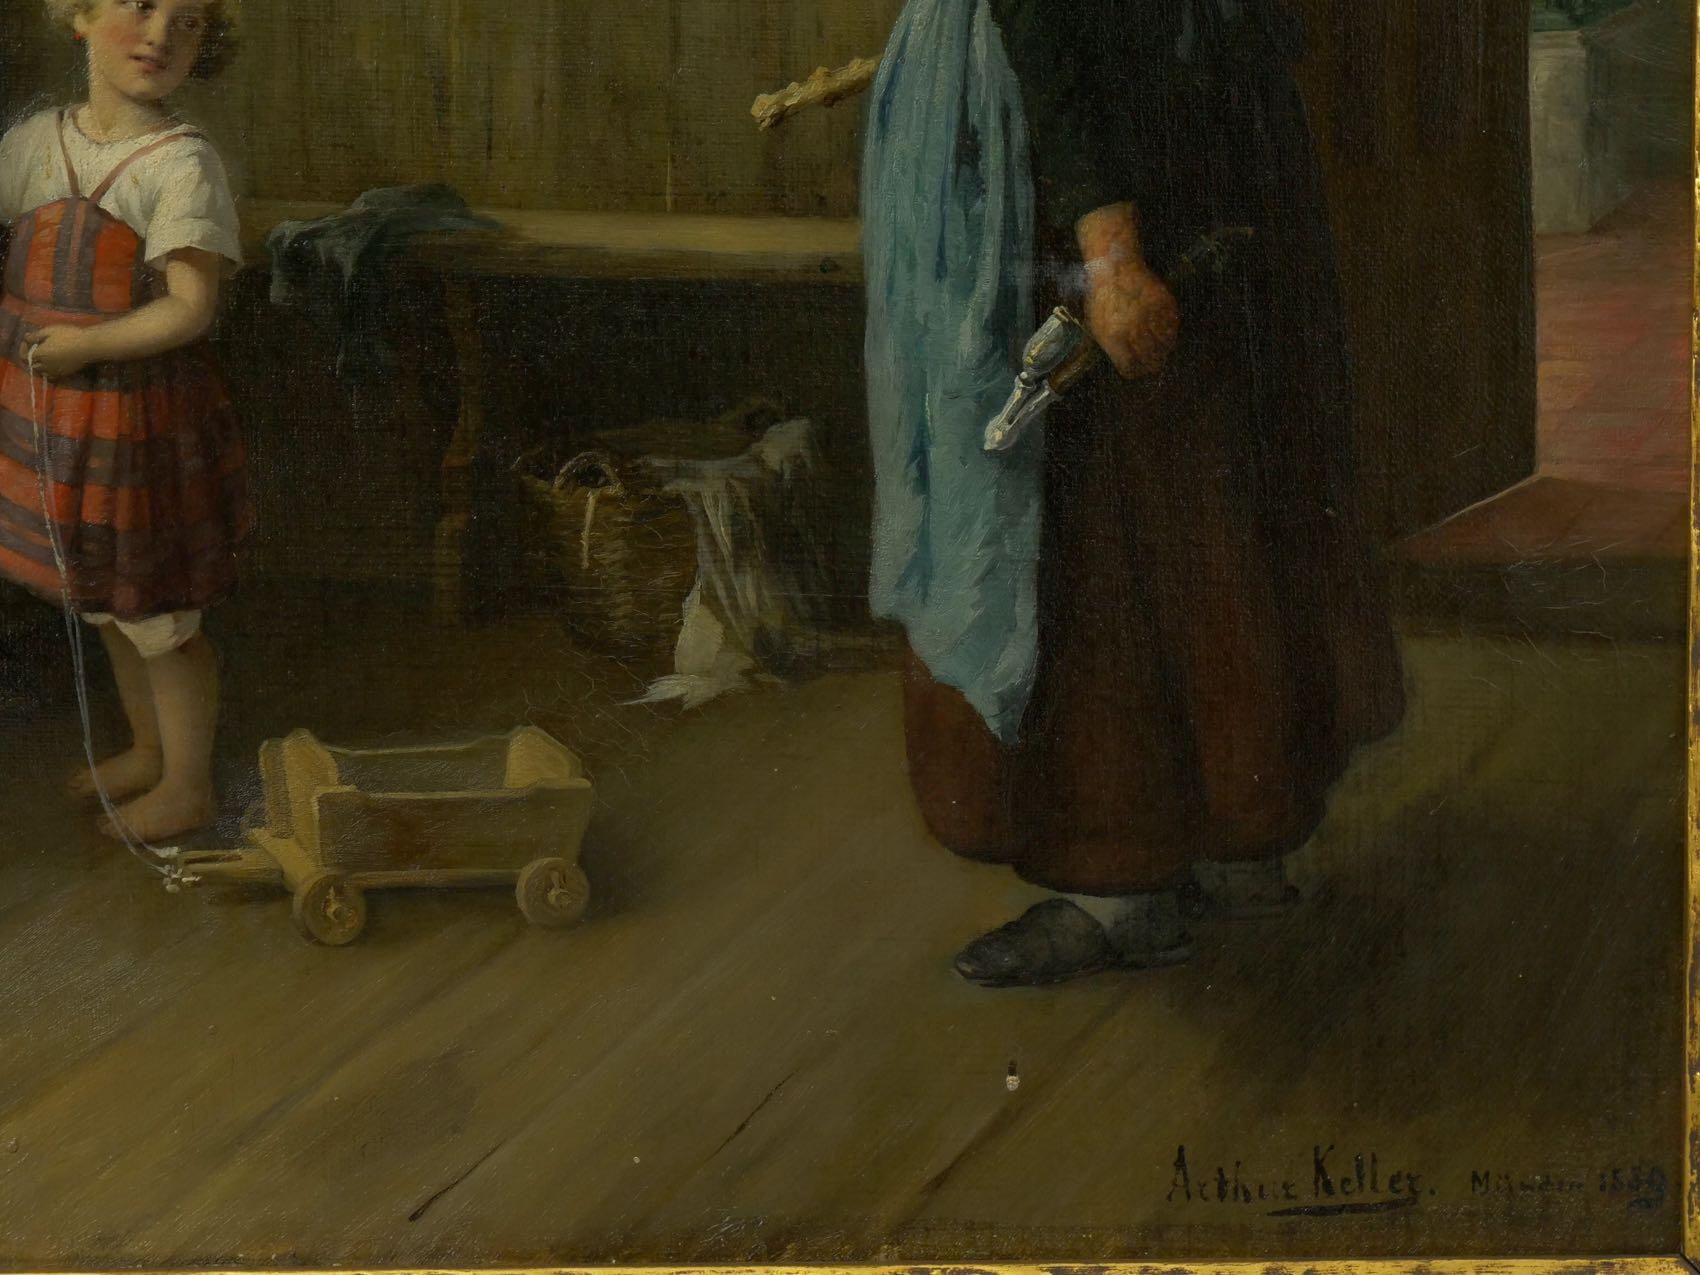 Hand-Painted “Caught Smoking” Interior Oil Painting by Arthur Keller (American, 1866-1924)